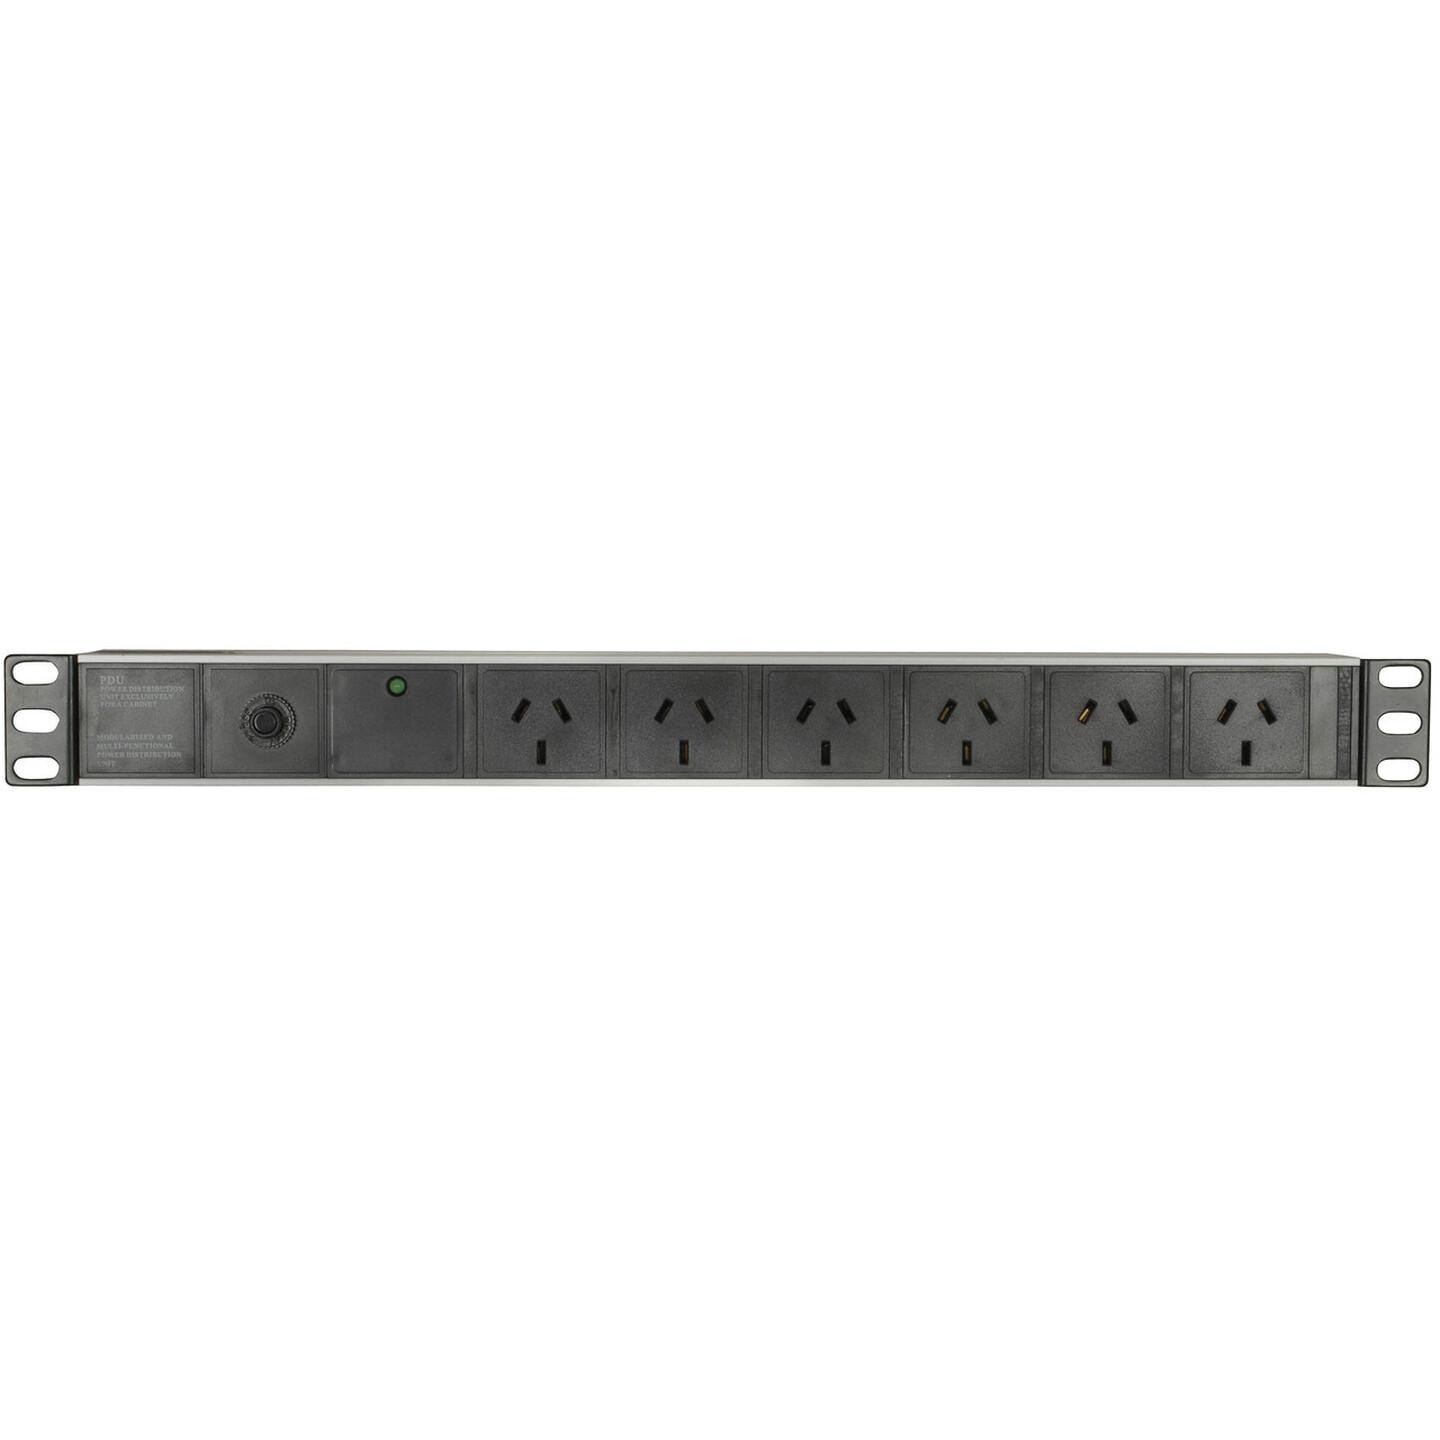 6-Way PDU with Surge and Overload Protection